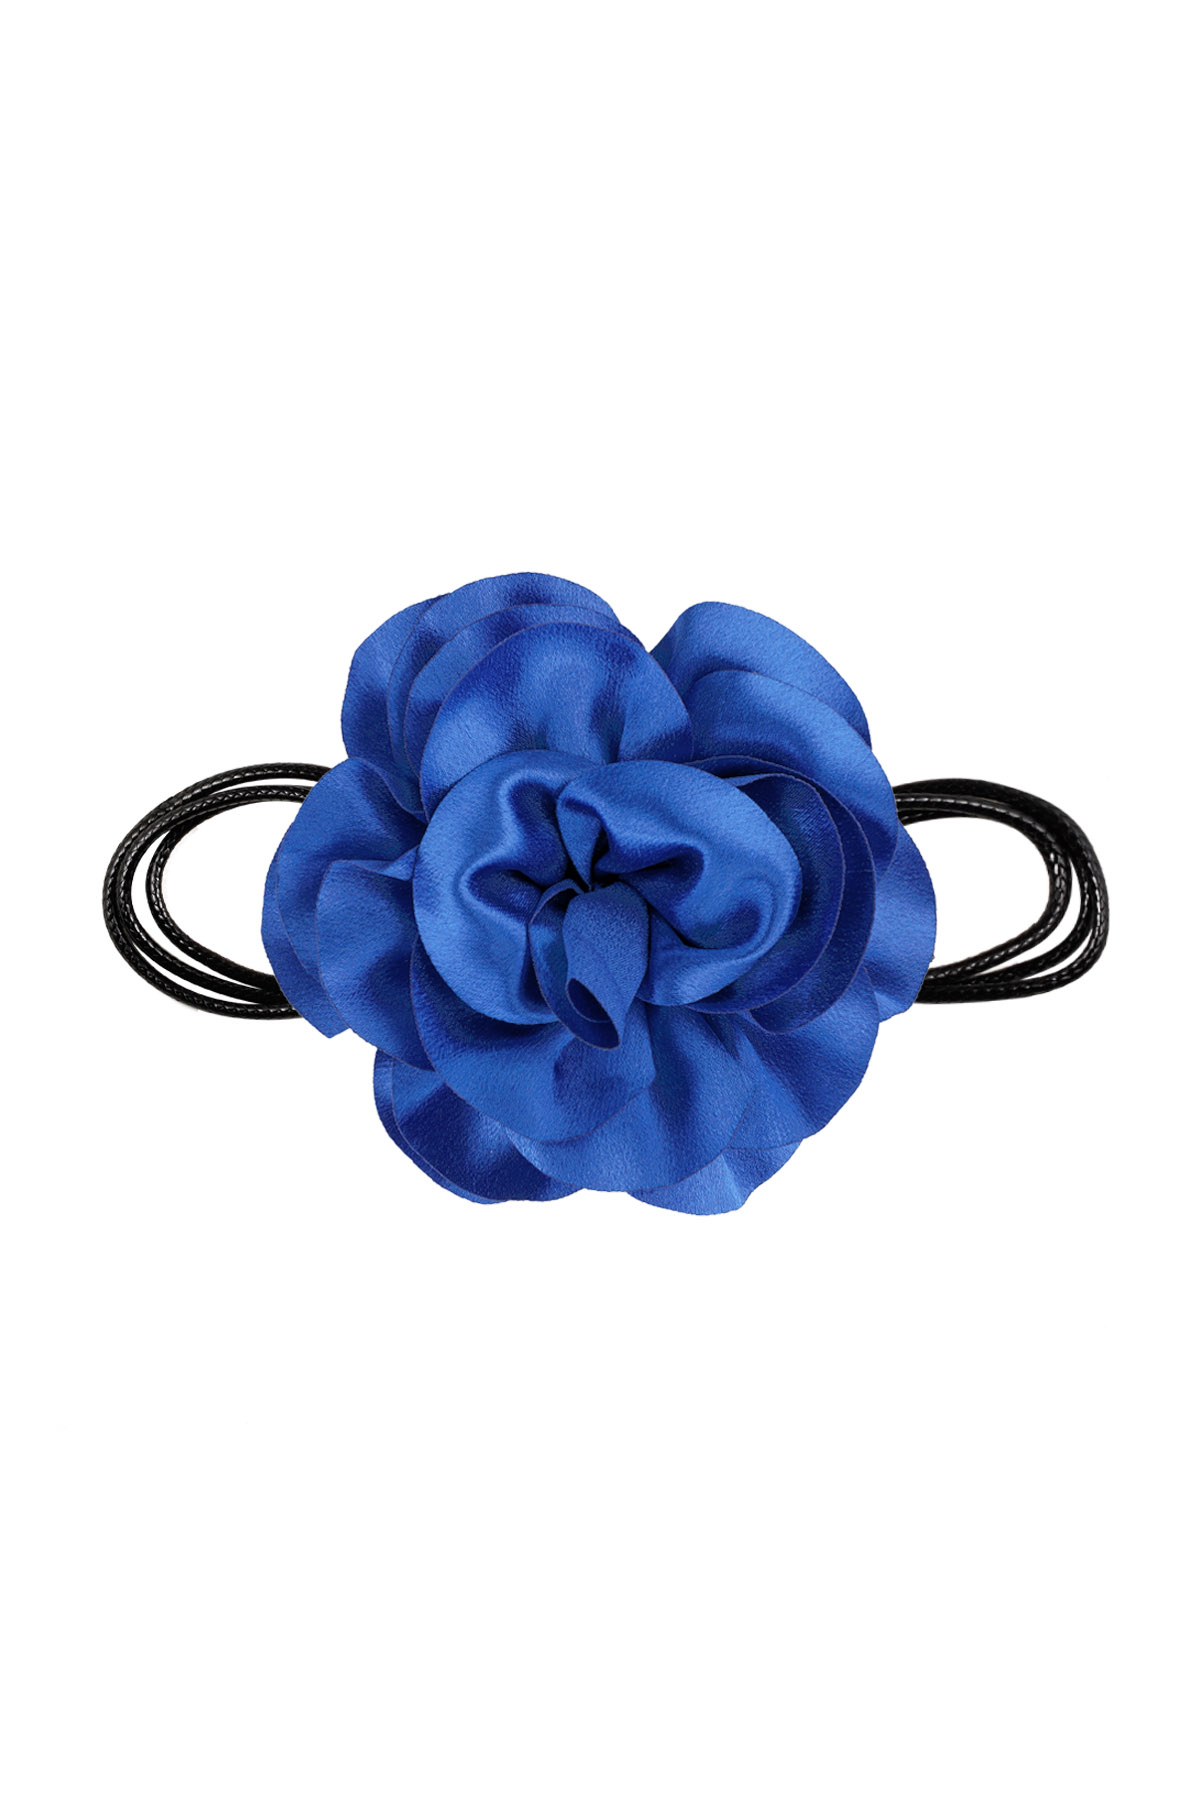 Necklace rope shiny flower - bright blue